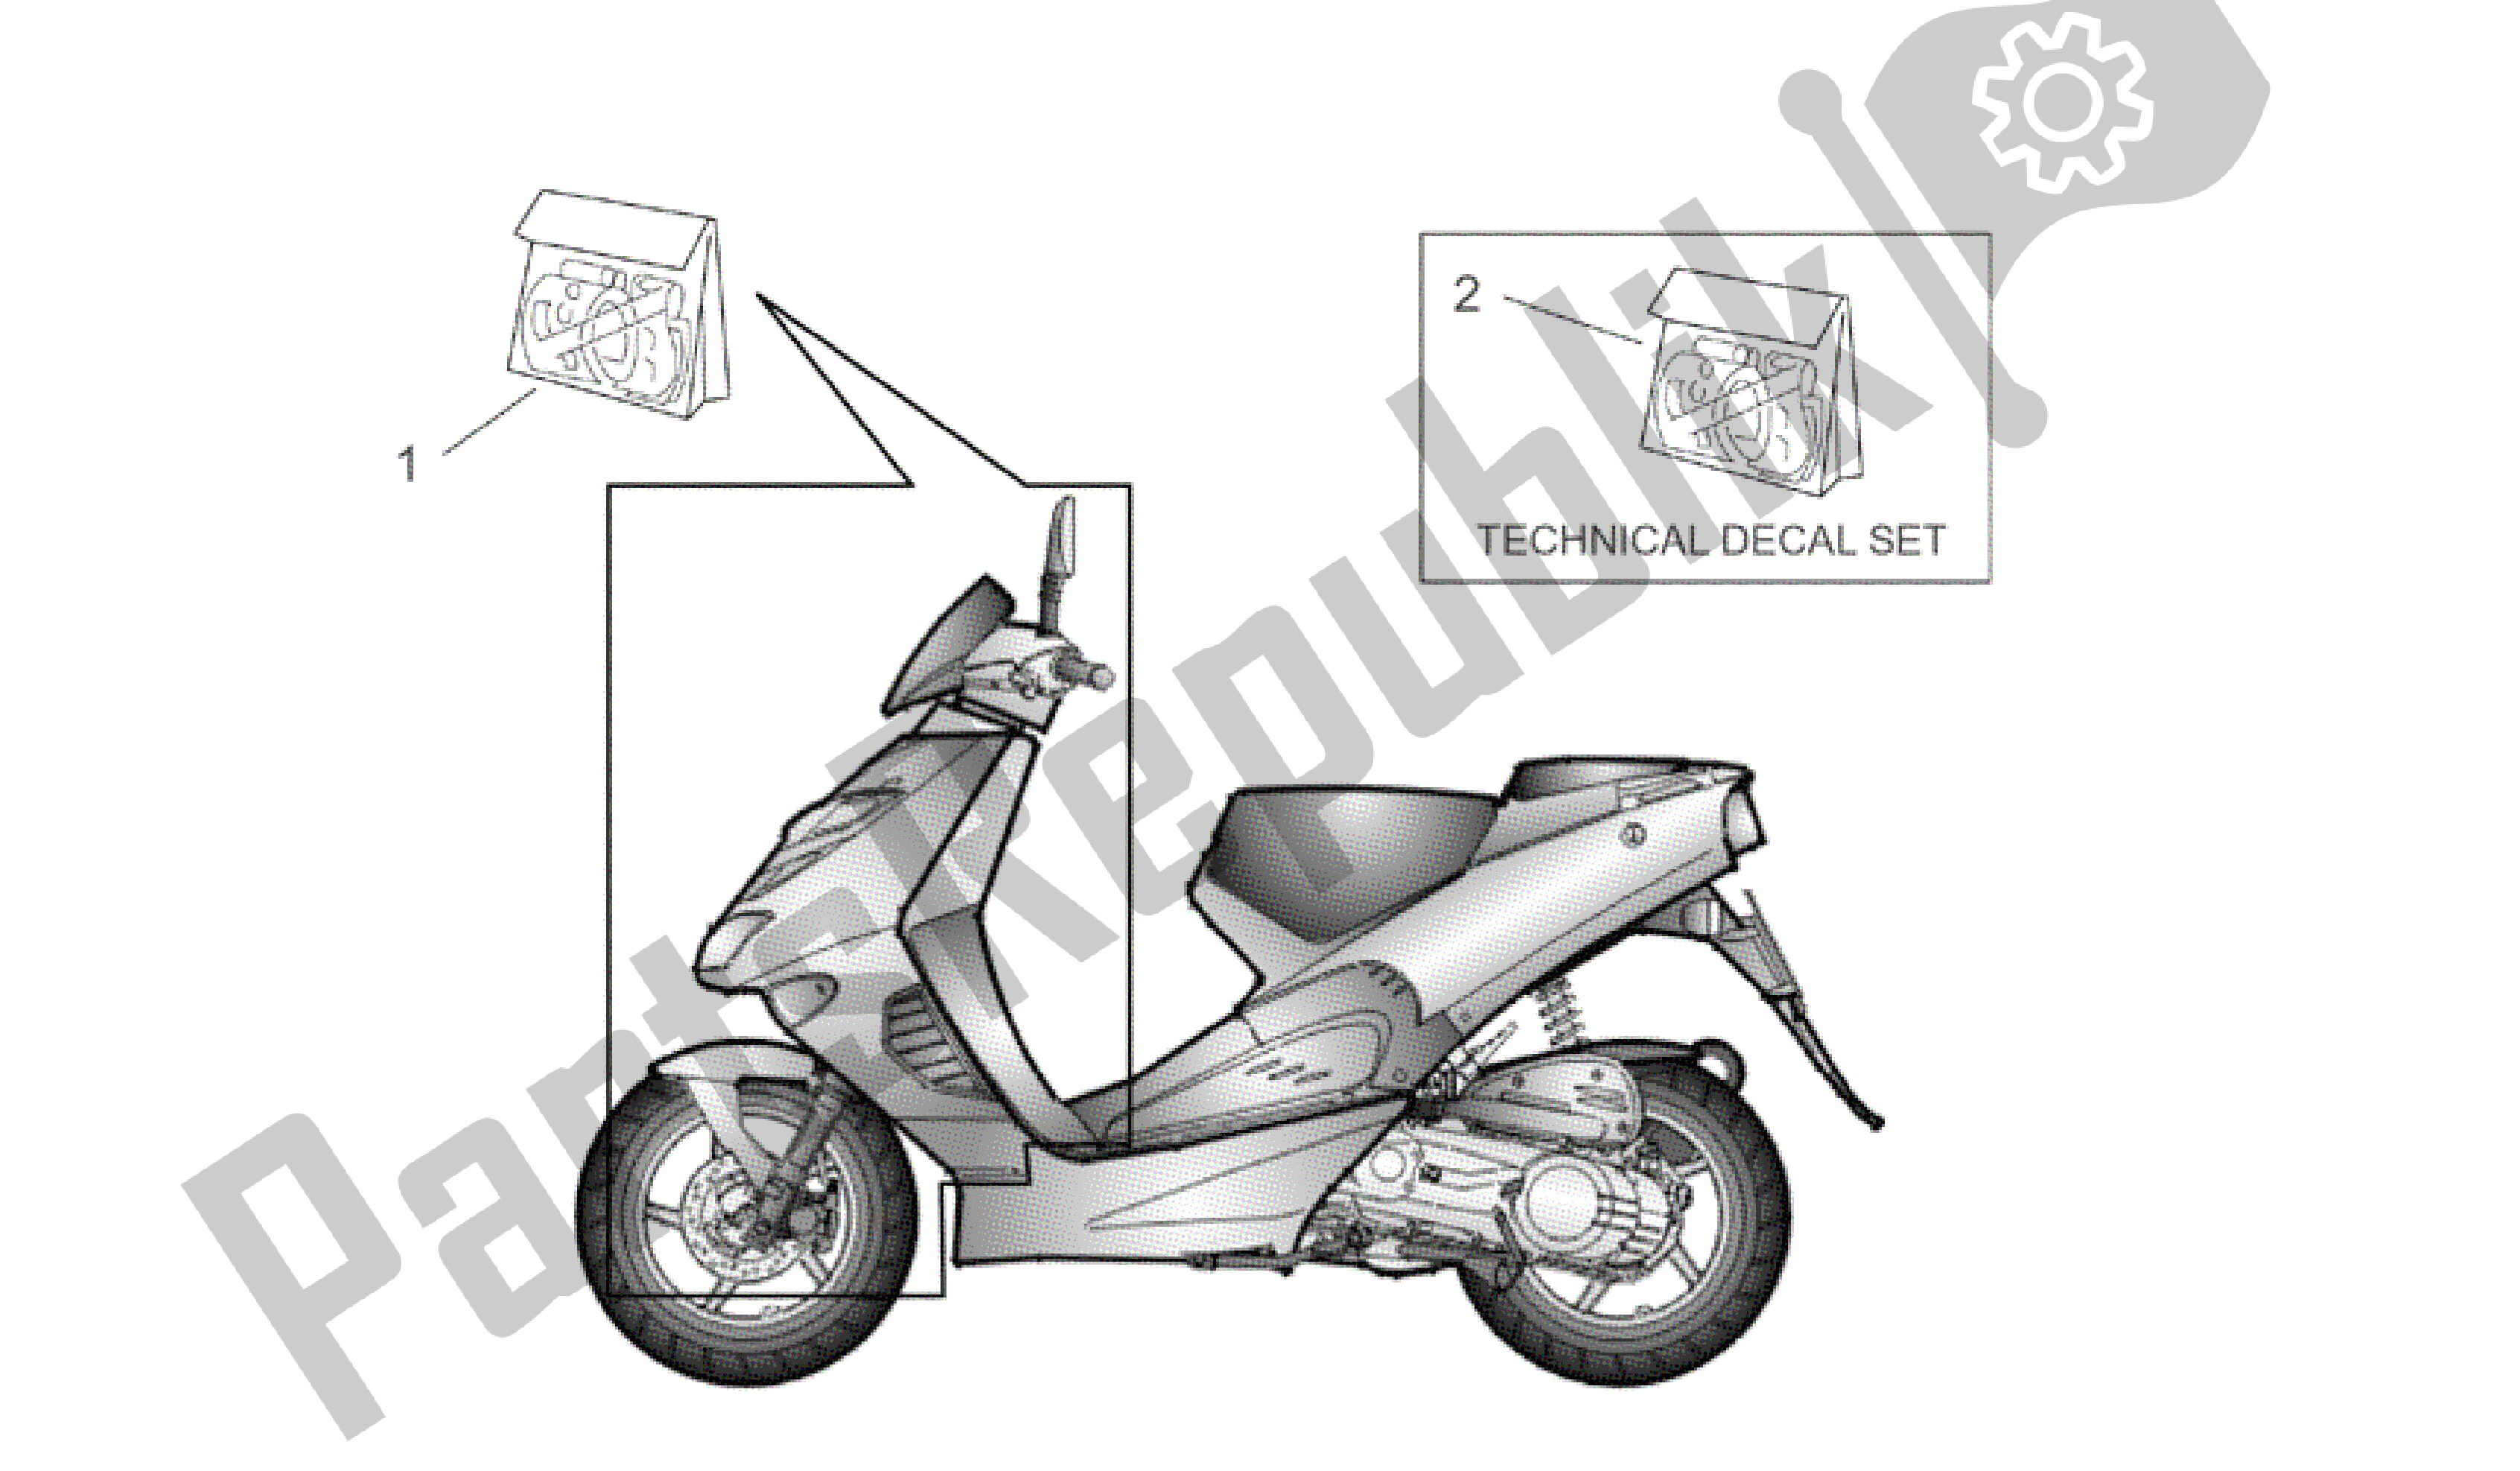 All parts for the Front Body And Technical Decal of the Aprilia SR 50 2000 - 2004